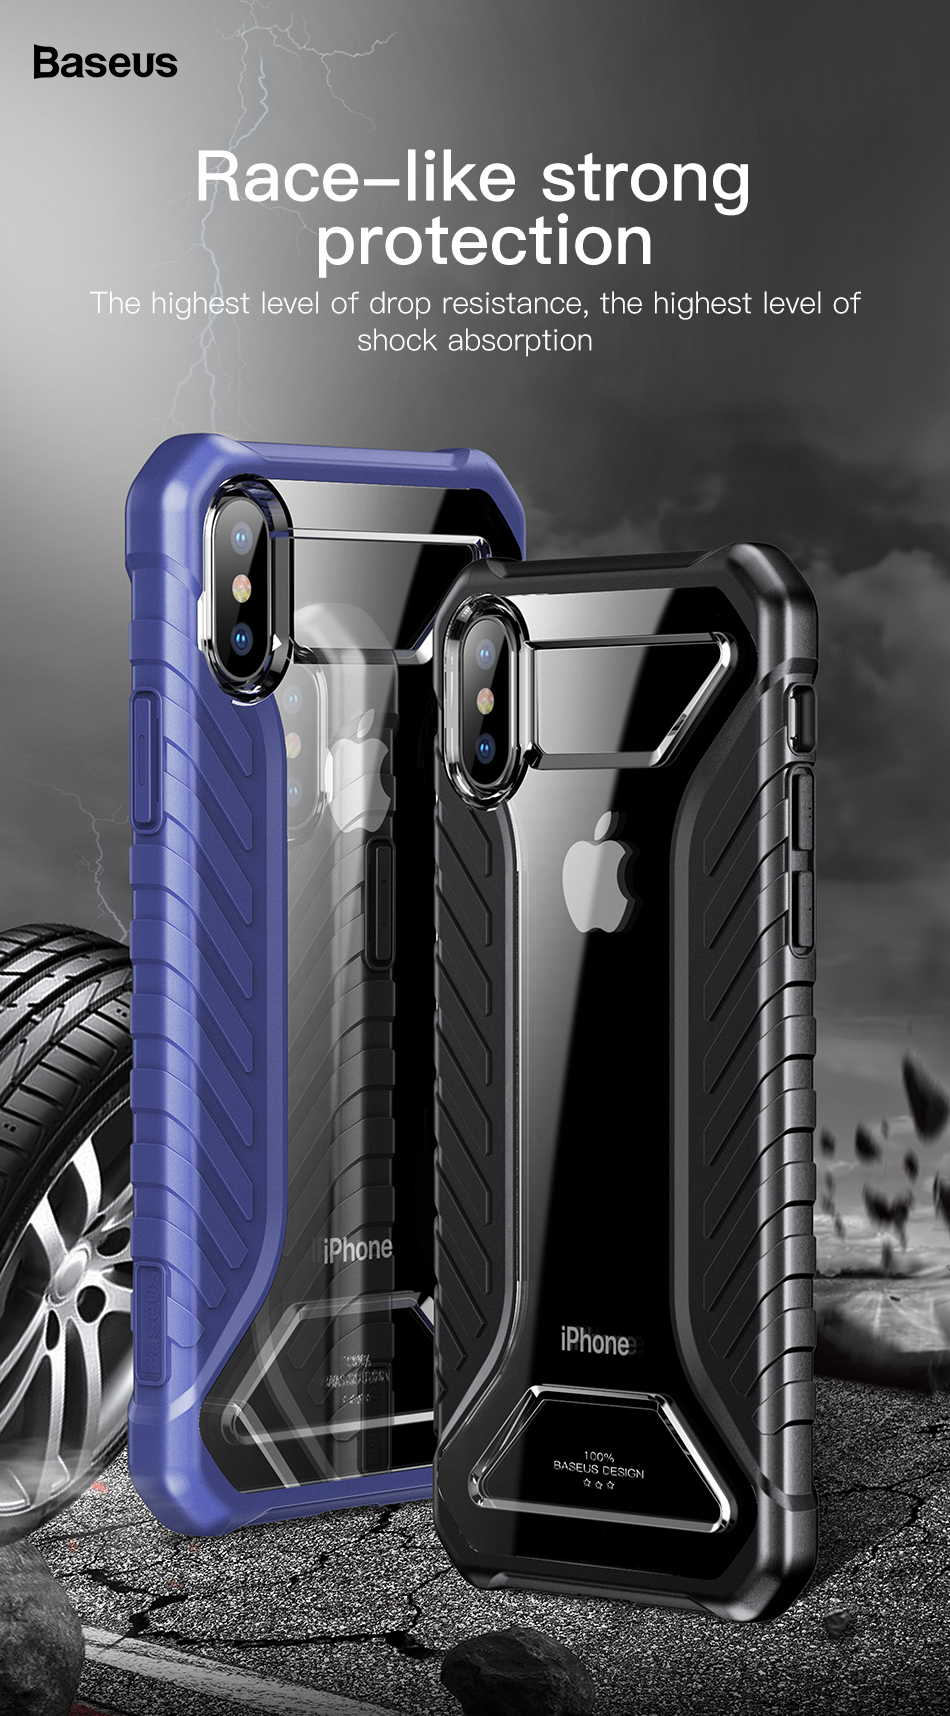 Baseus-Shockproof-Dropproof-Protective-Case-For-iPhone-XS-Max-Hybrid-PC-TPU-Back-Cover-1377693-1